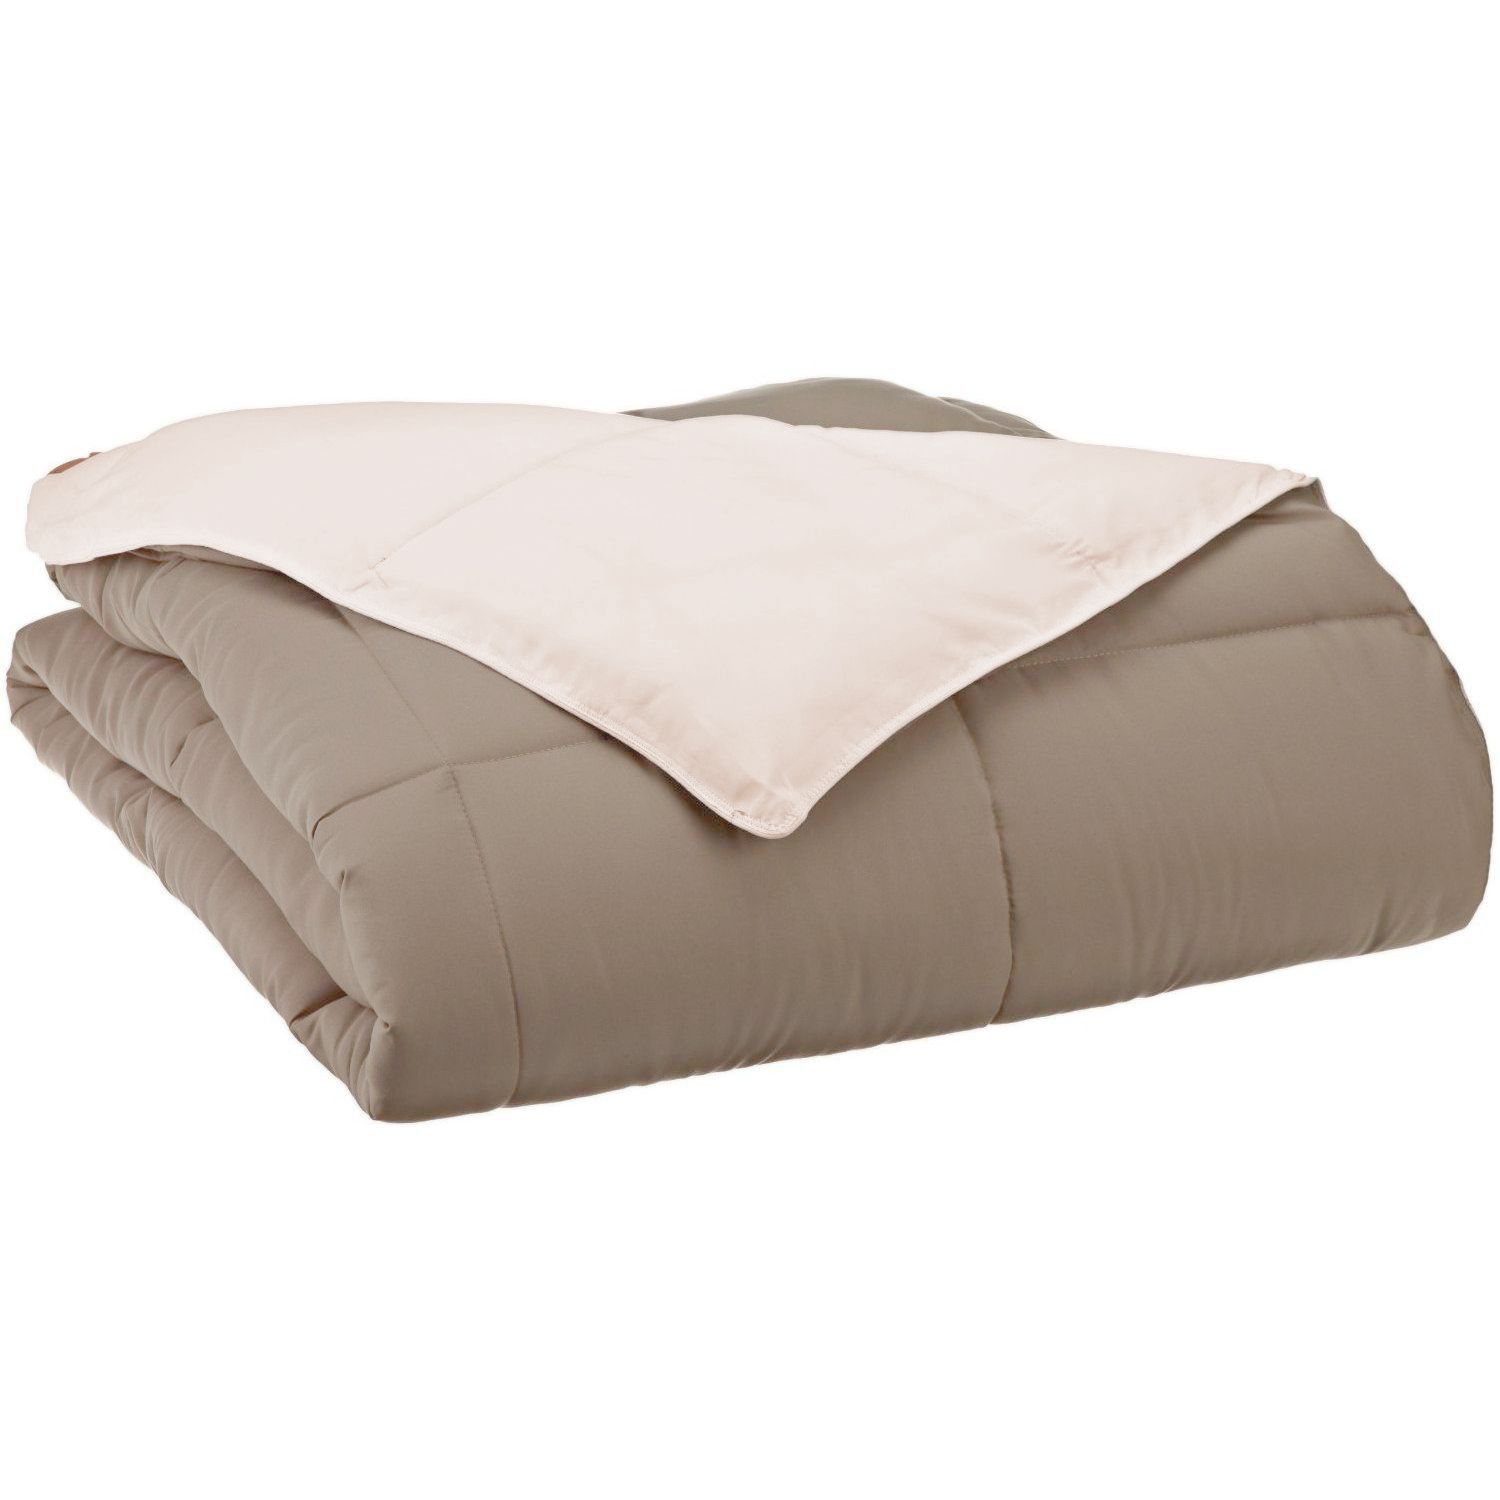 Superior Down Alternative Reversible Ivory-Taupe Comforter, King - image 1 of 4